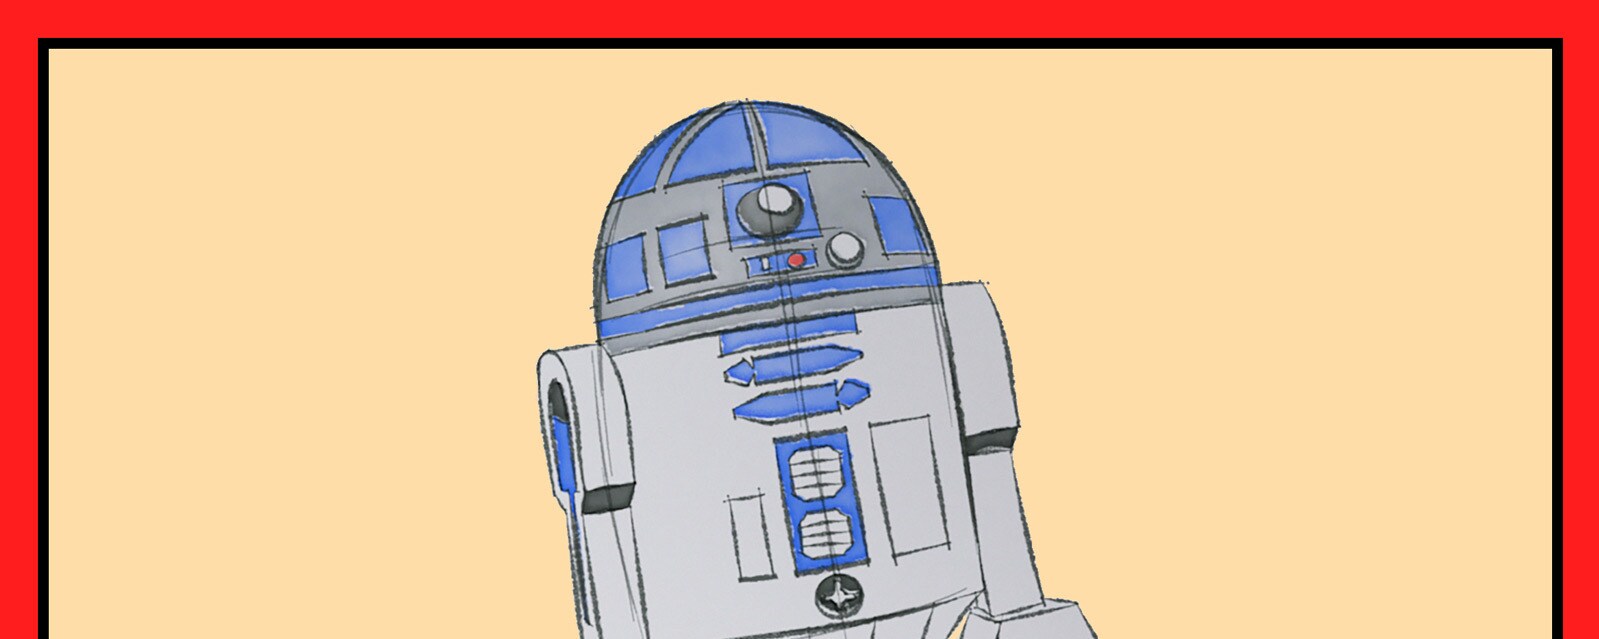 R2-D2 in How NOT to Draw R2-D2